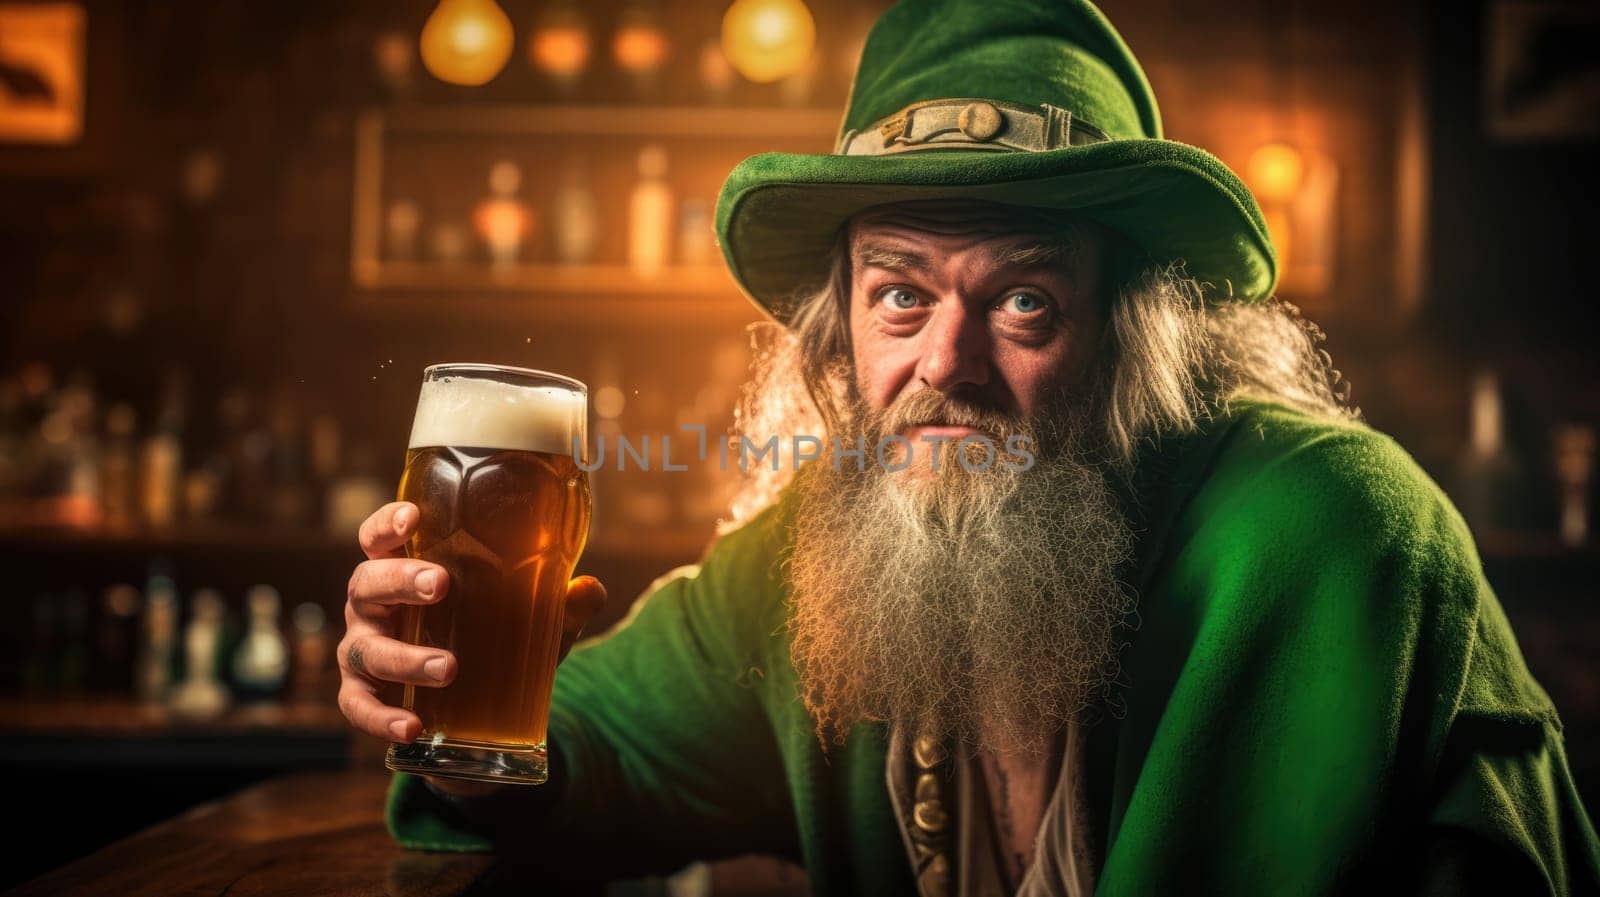 Cheerful elderly male with grey curly hair and beard dressed in elegant green suit and top hat toasting with foamy beer mug in honor of Saint Patricks Day against dark background